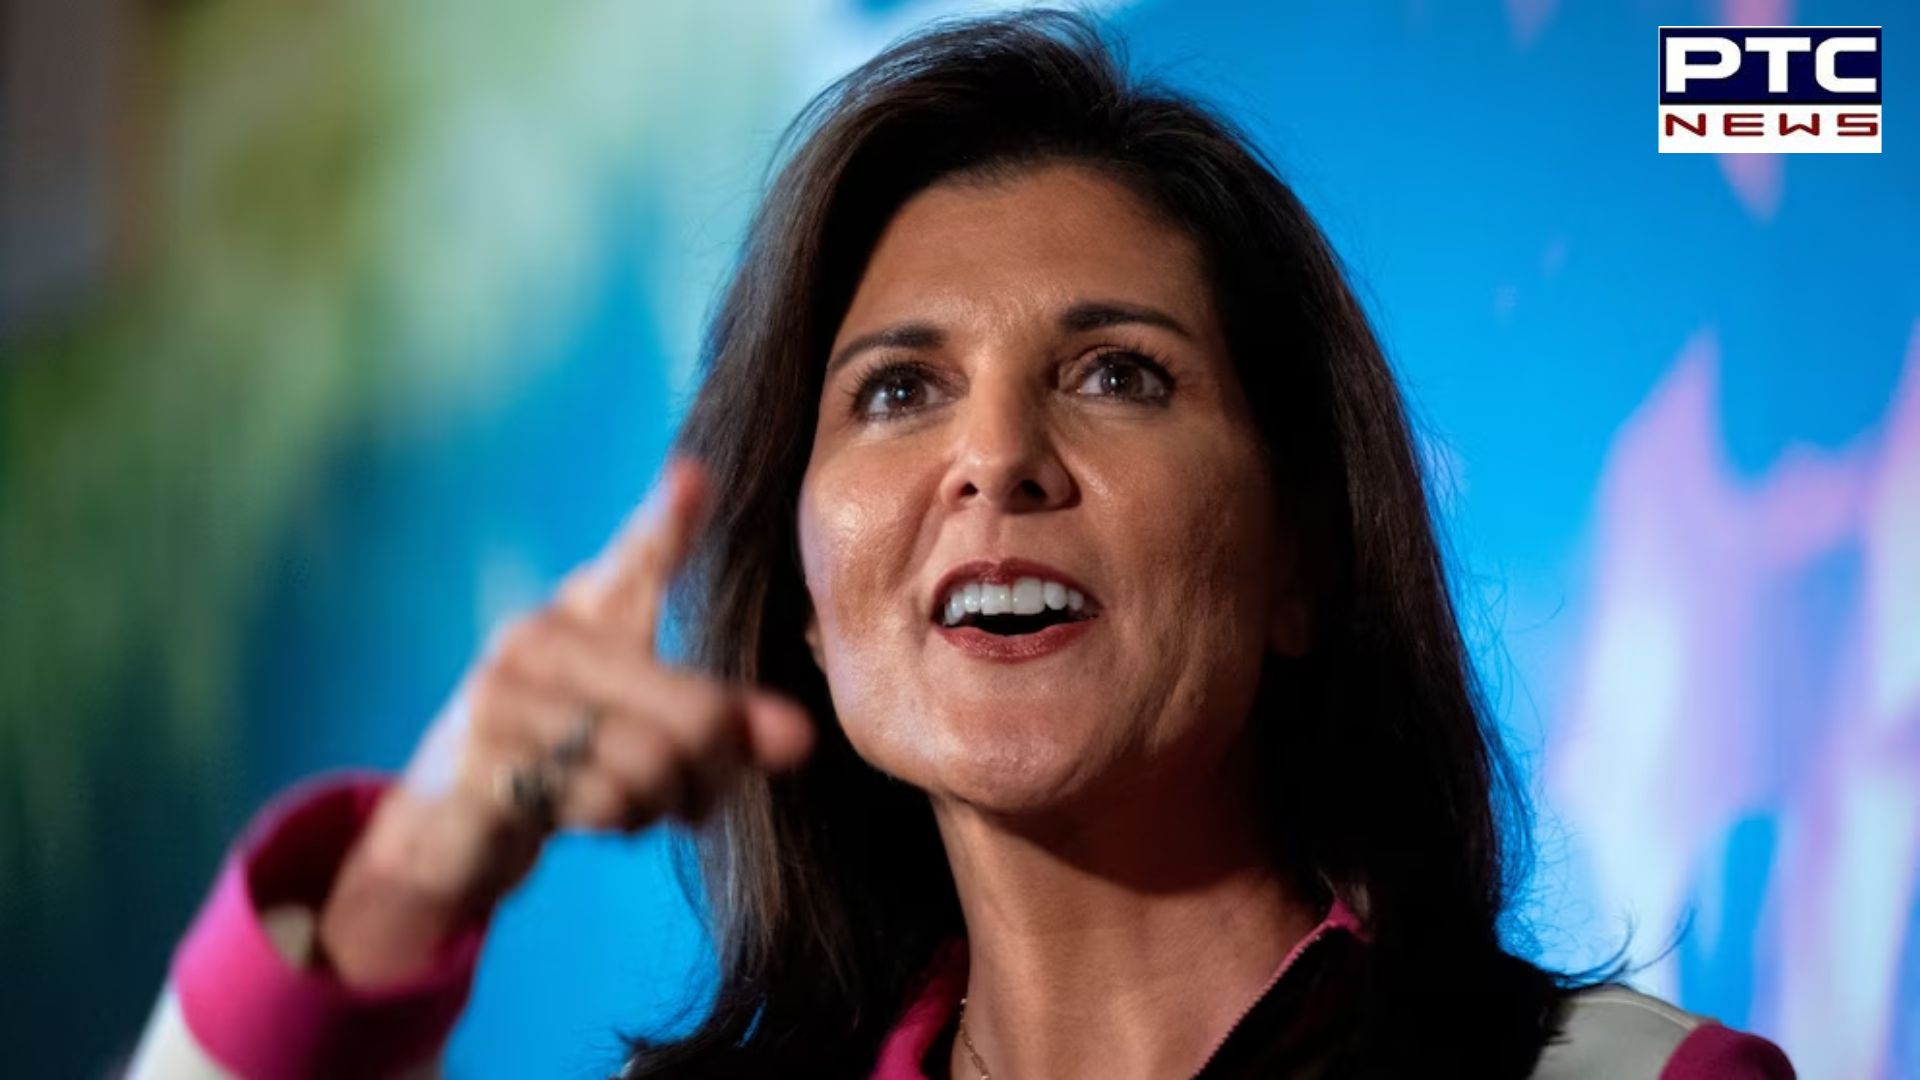 India sees US as weak, played smart by staying close with Russia : Nikki Haley